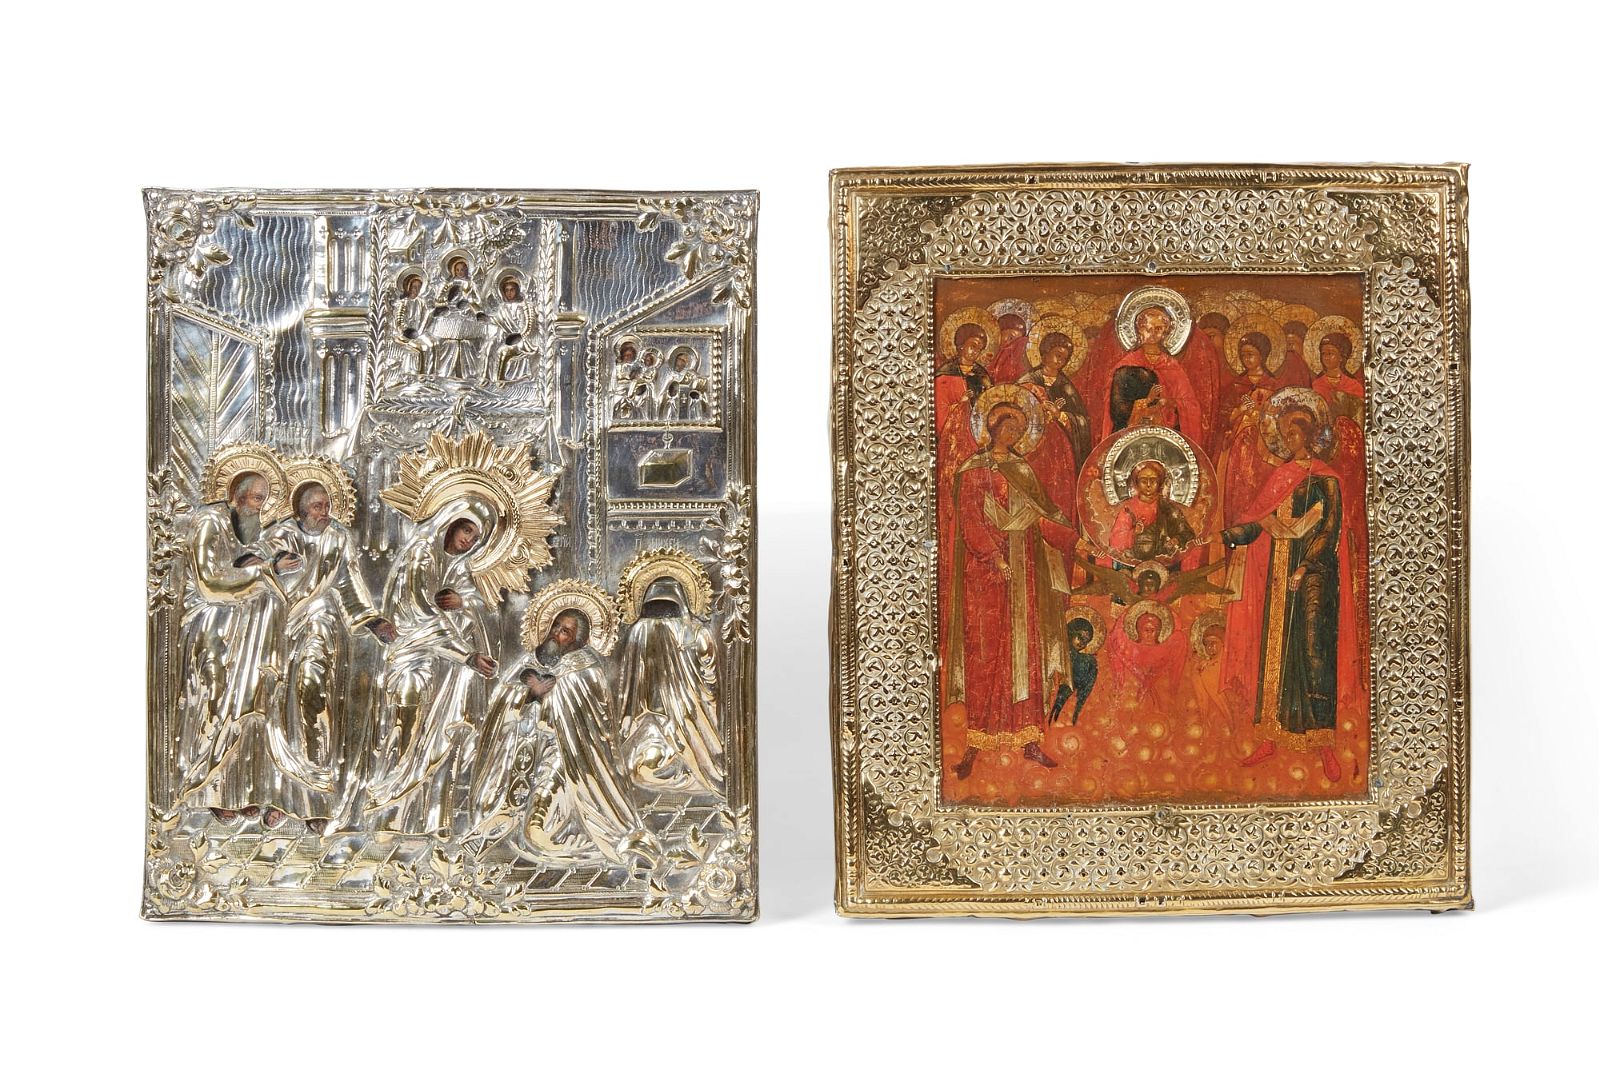 TWO RUSSIAN ICONS 17TH 19TH CENTURYTwo 2fb3ffe